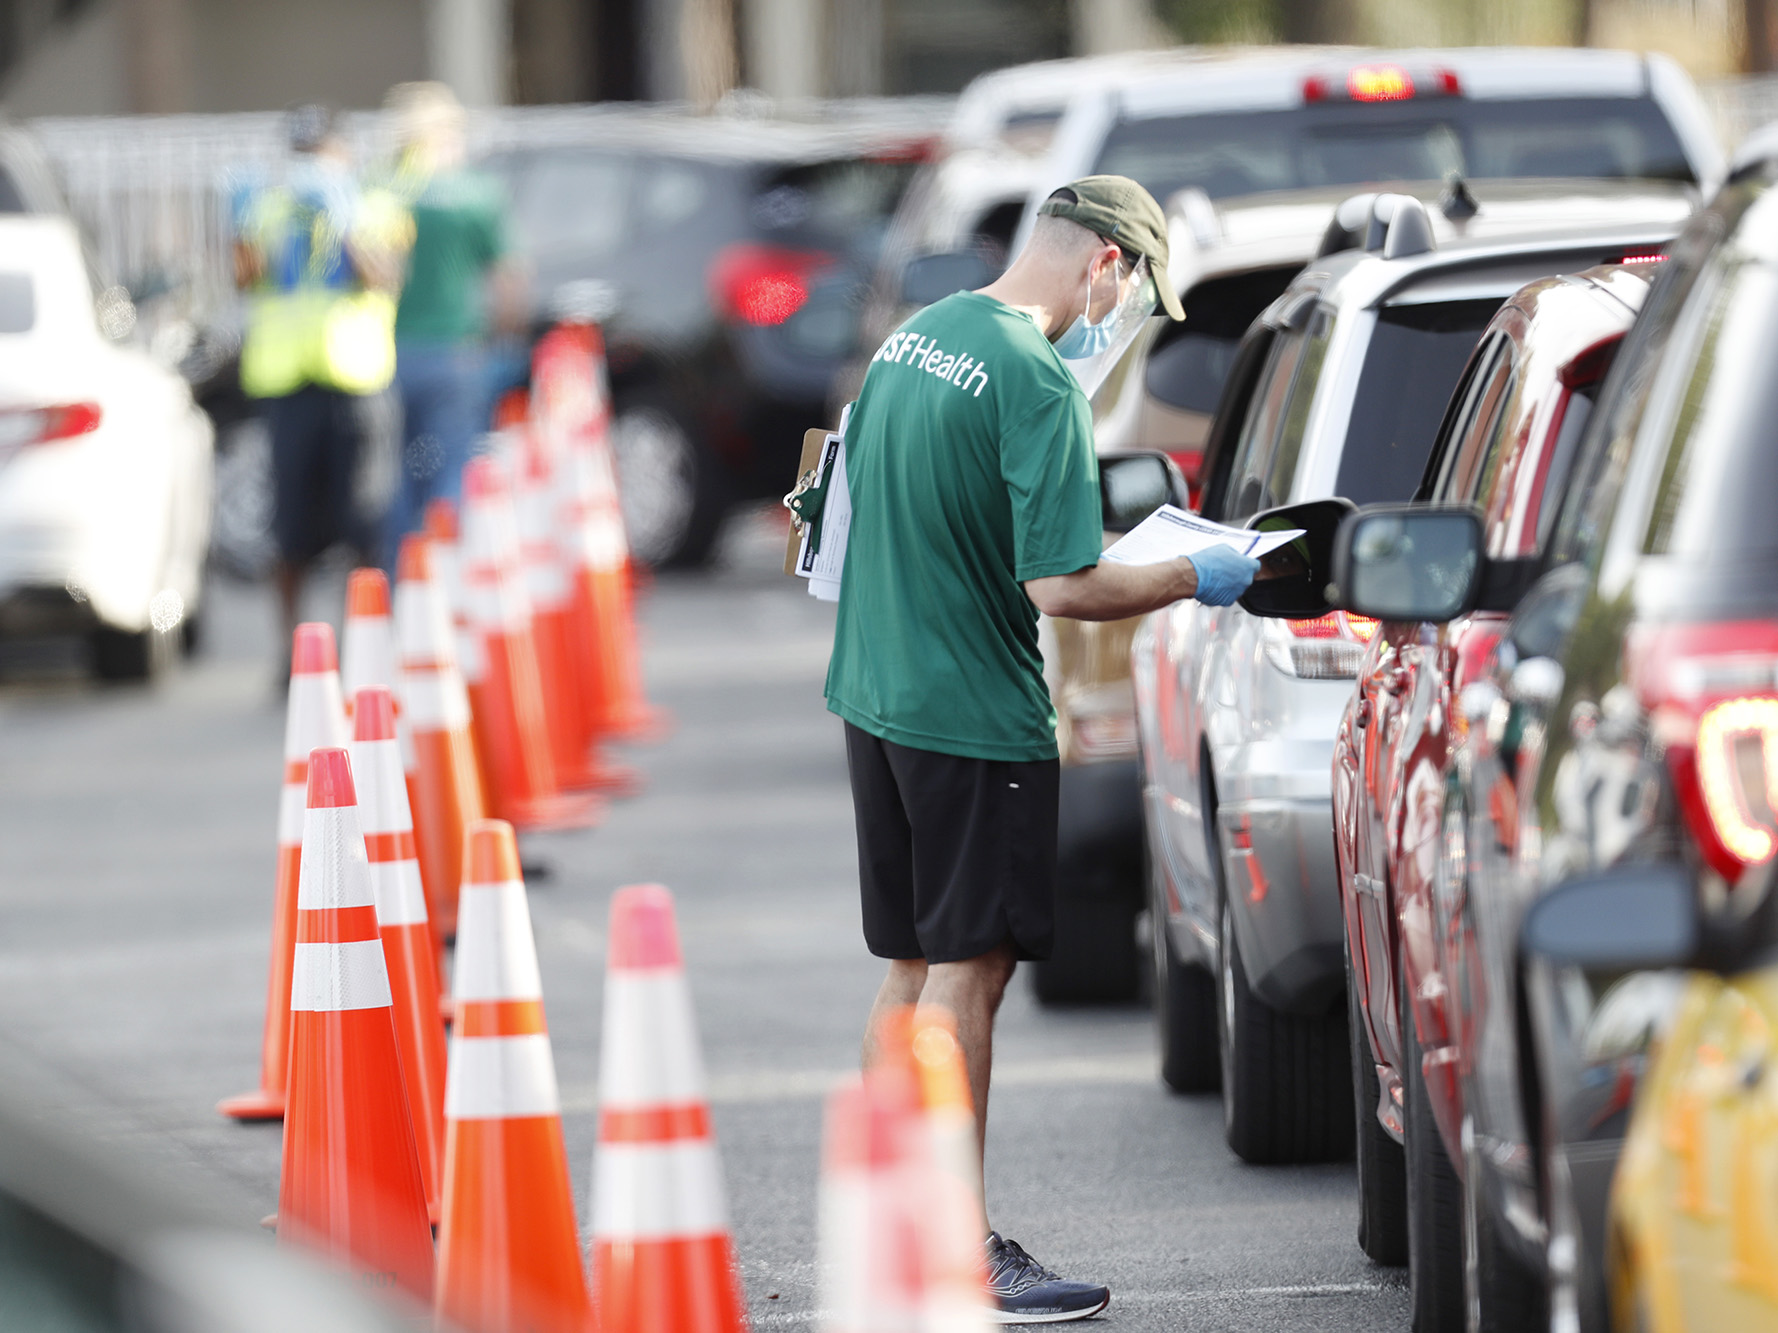 A University of South Florida (USF) Health administrator talks to a driver before they receive a coronavirus test at the Lee Davis Community Resource Center on June 25, 2020 in Tampa, Florida.